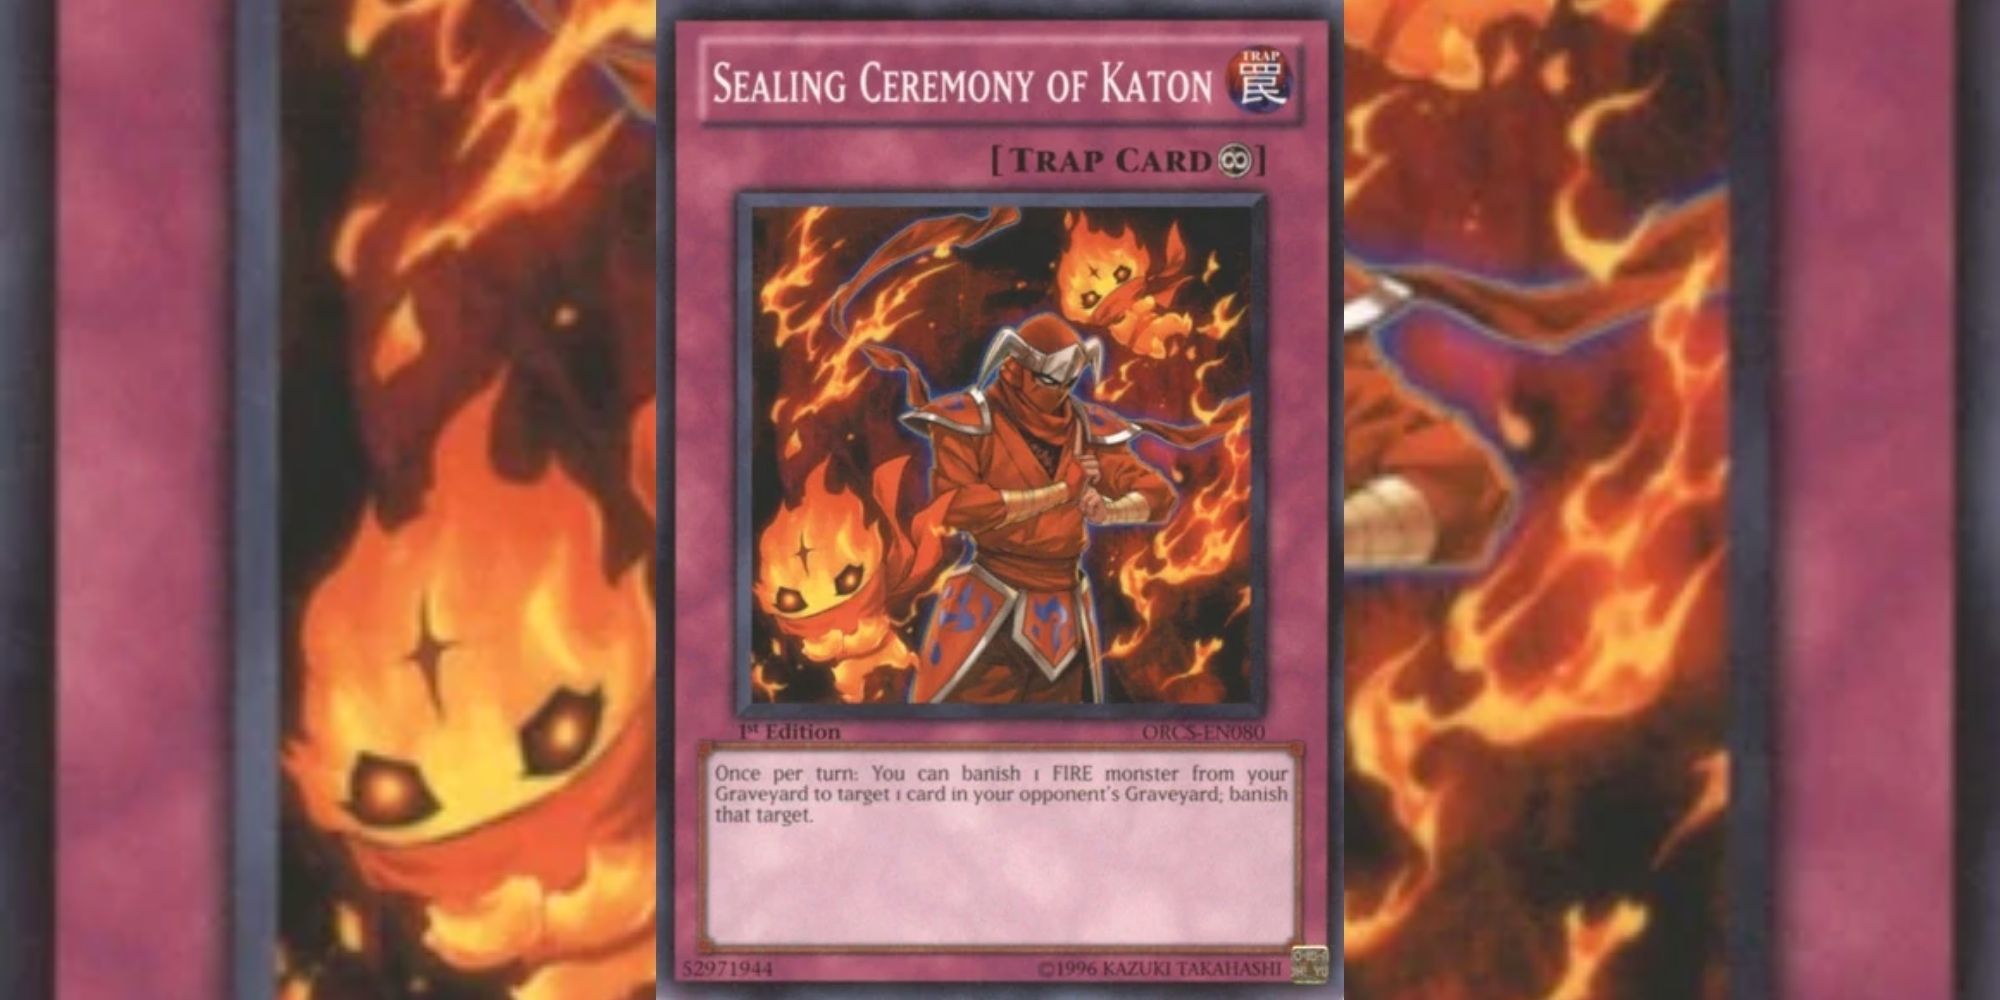 Sealing Ceremony of Katon card in Yu-Gi-Oh!